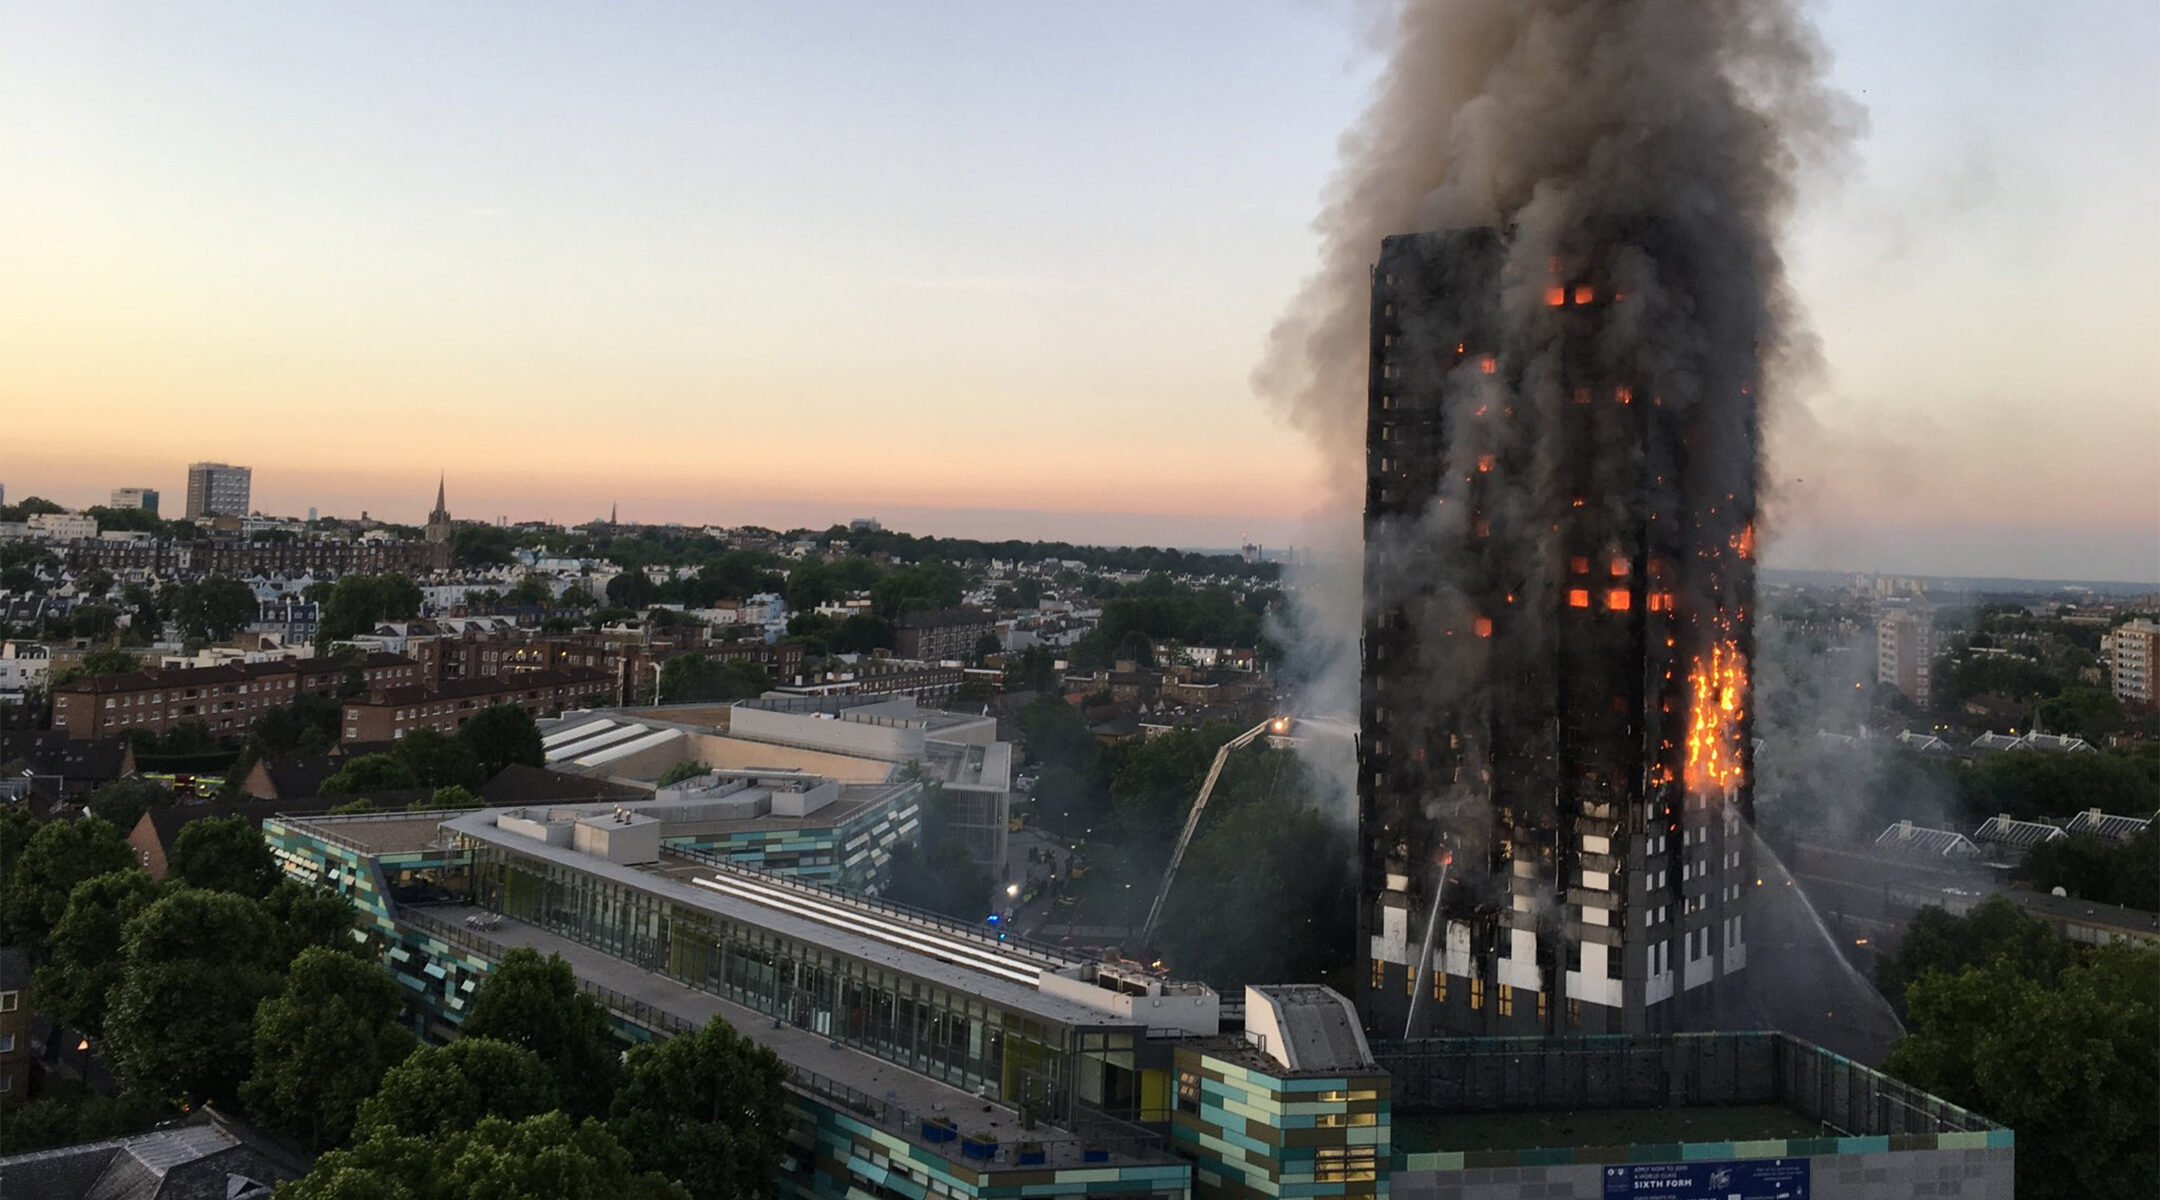 The Grenfell tower burns in London, UK on 14 June, 2017. (Natalie Oxford/Wikimedia Commons)